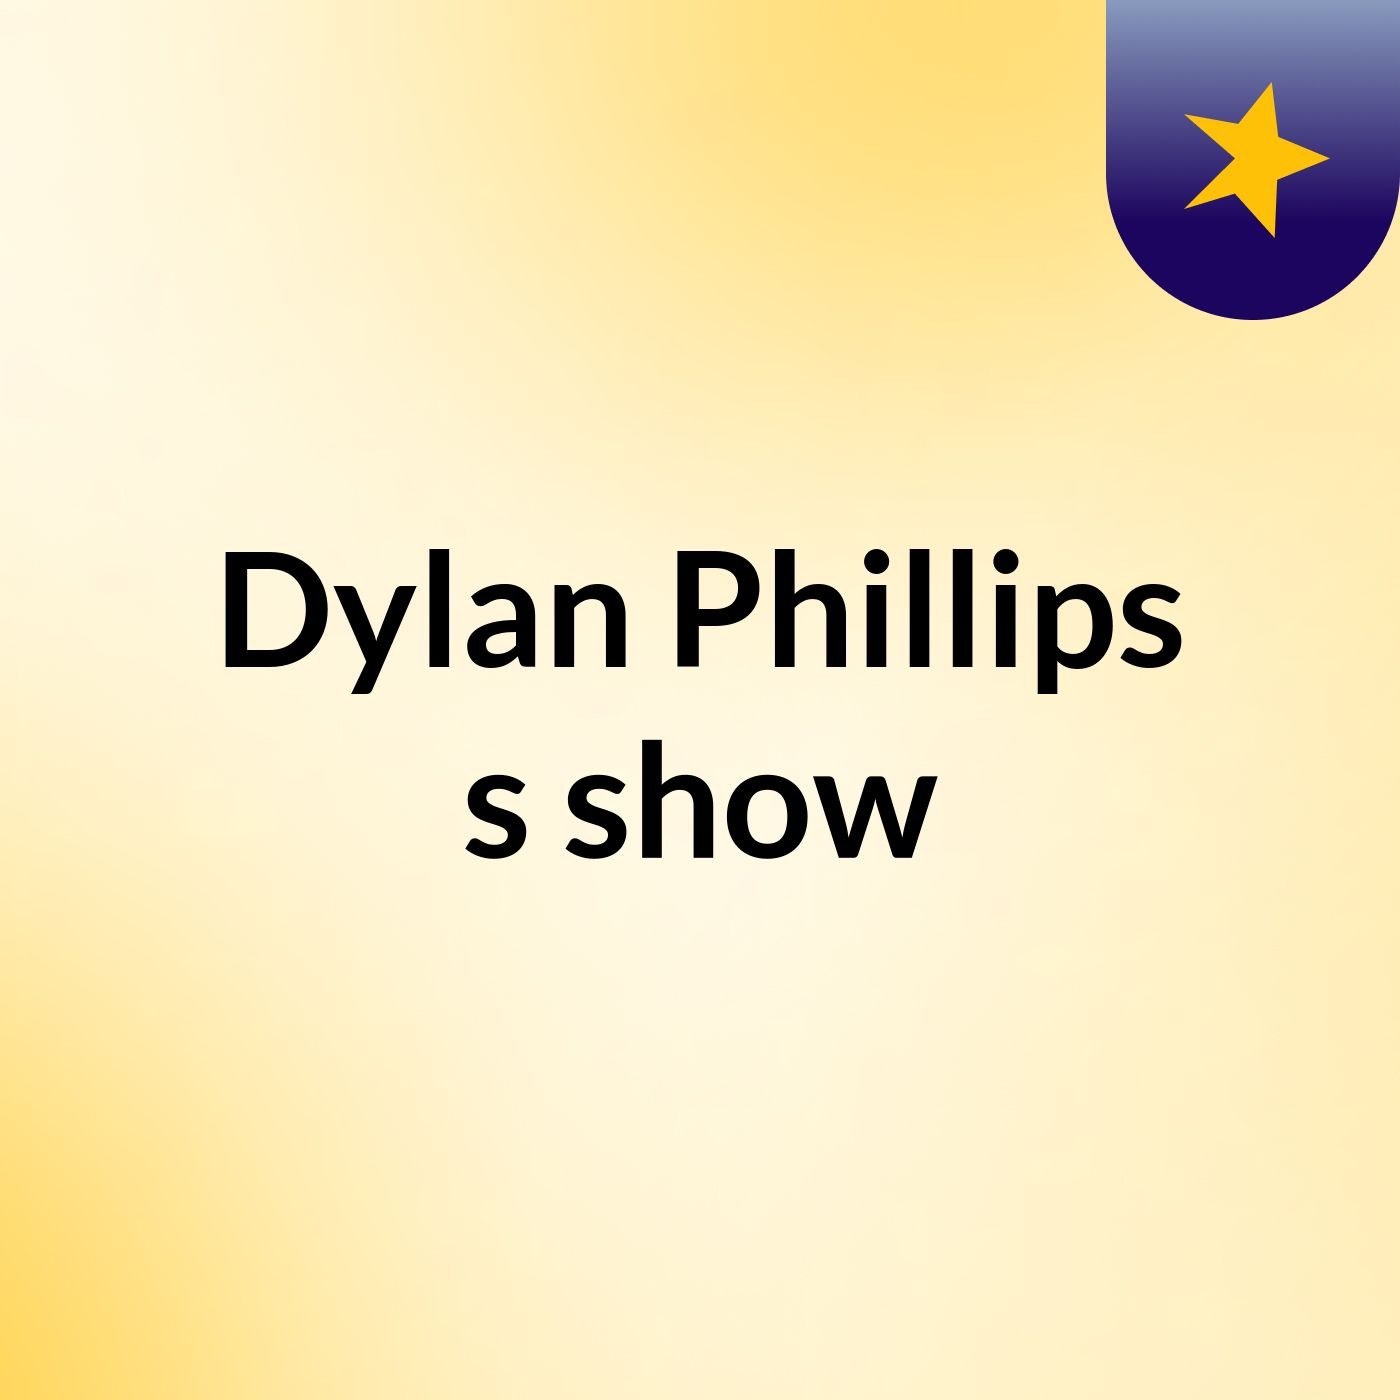 Dylan Phillips's show